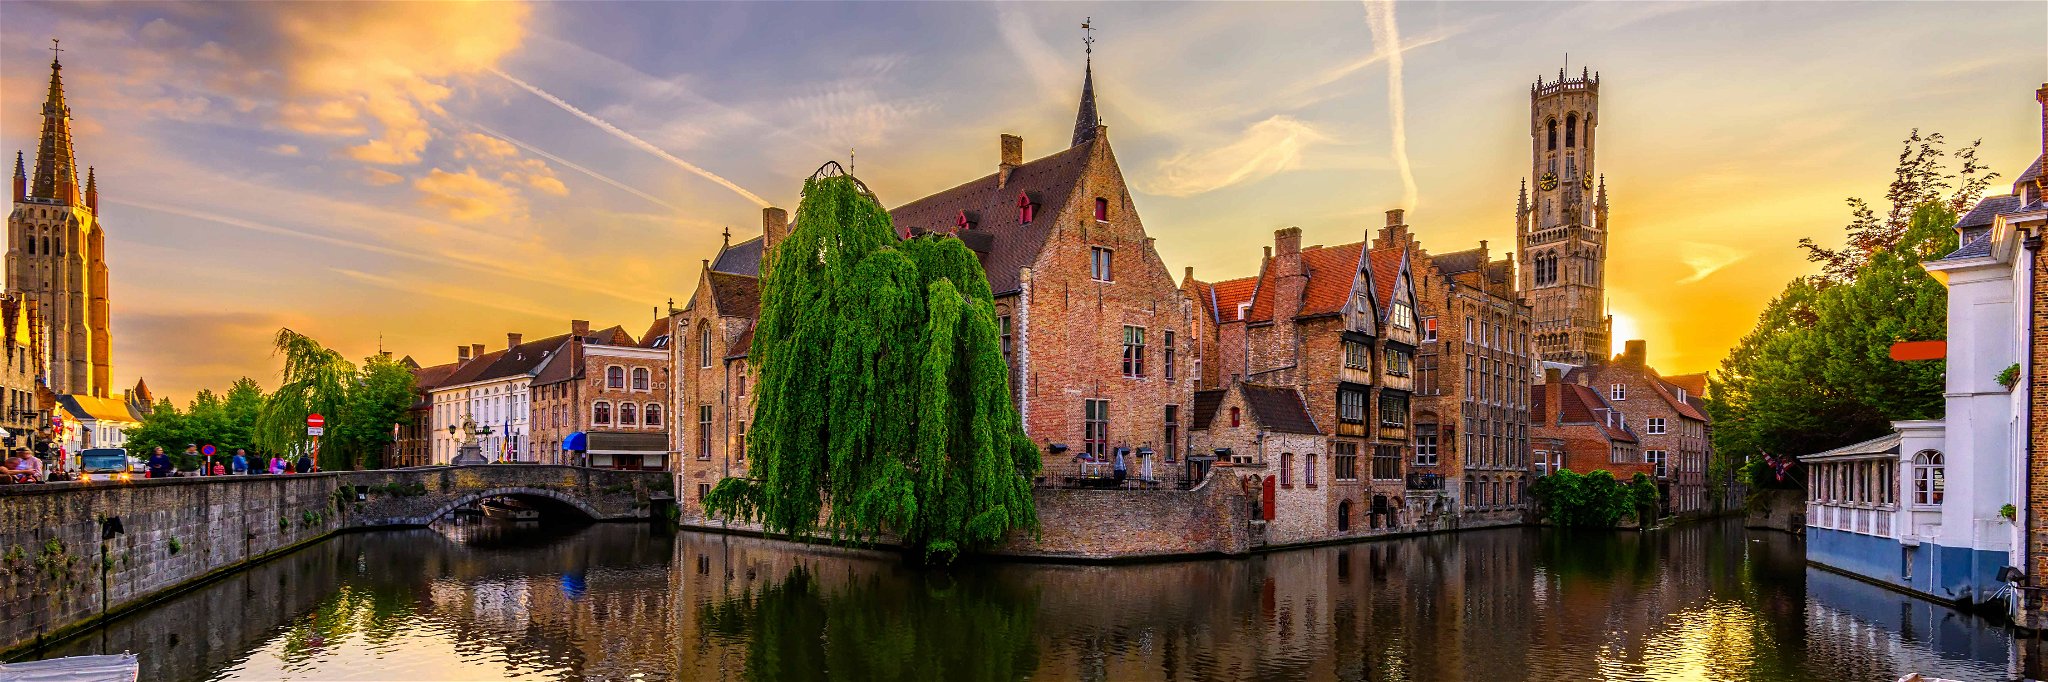 Bruges is the most pedestrian-friendly city in Europe.